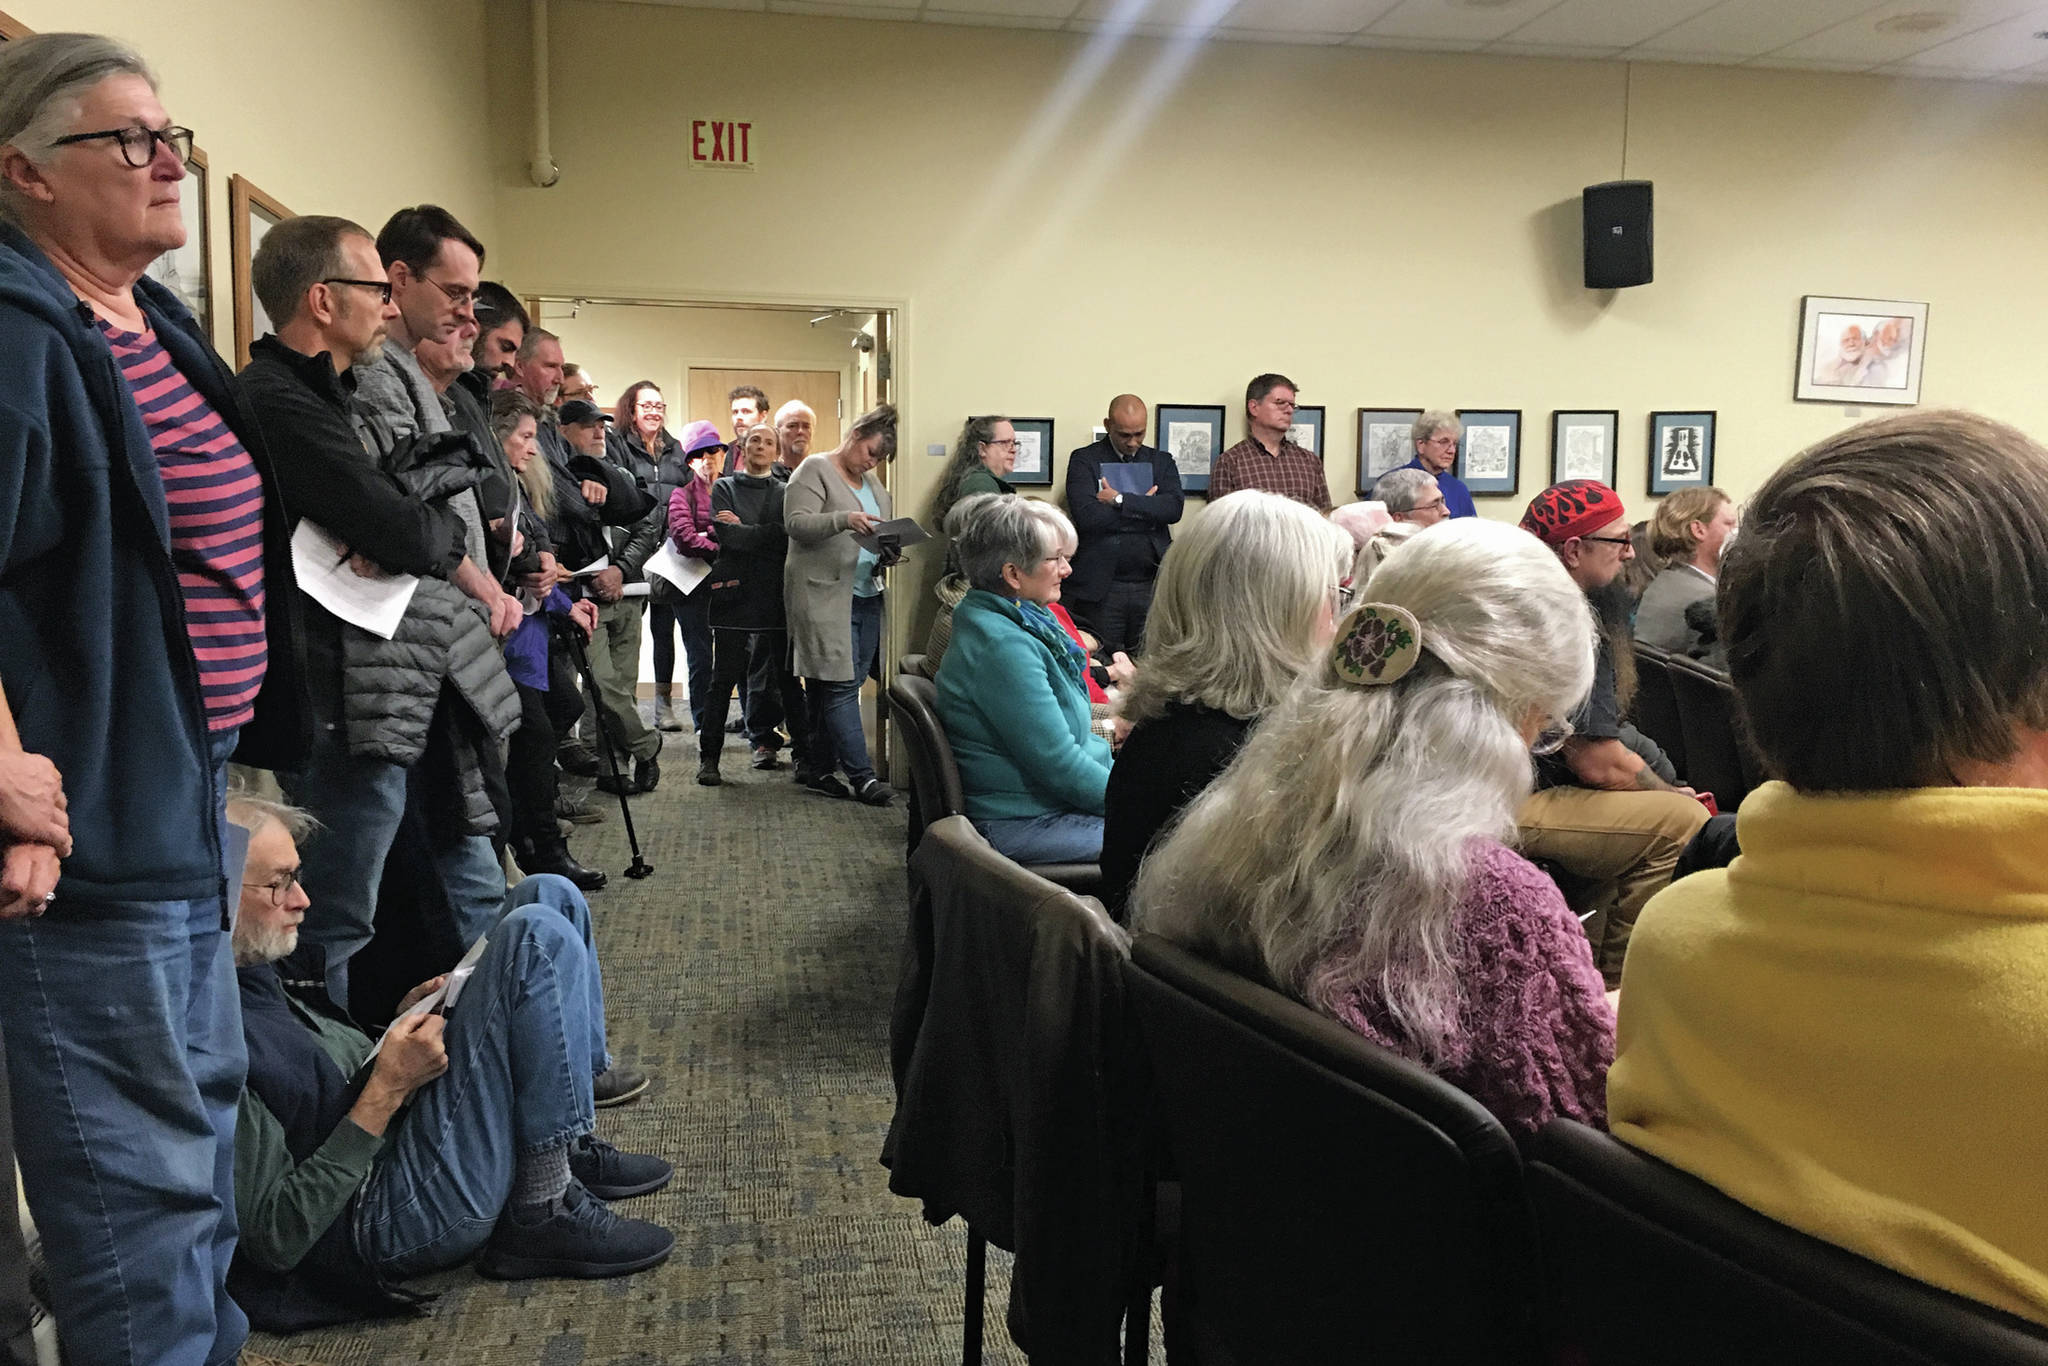 Community members pack into a standing room only city council chambers Monday, Oct. 14, 2019 for a council meeting in Homer City Hall in Homer, Alaska. (Photo by Megan Pacer/Homer News)